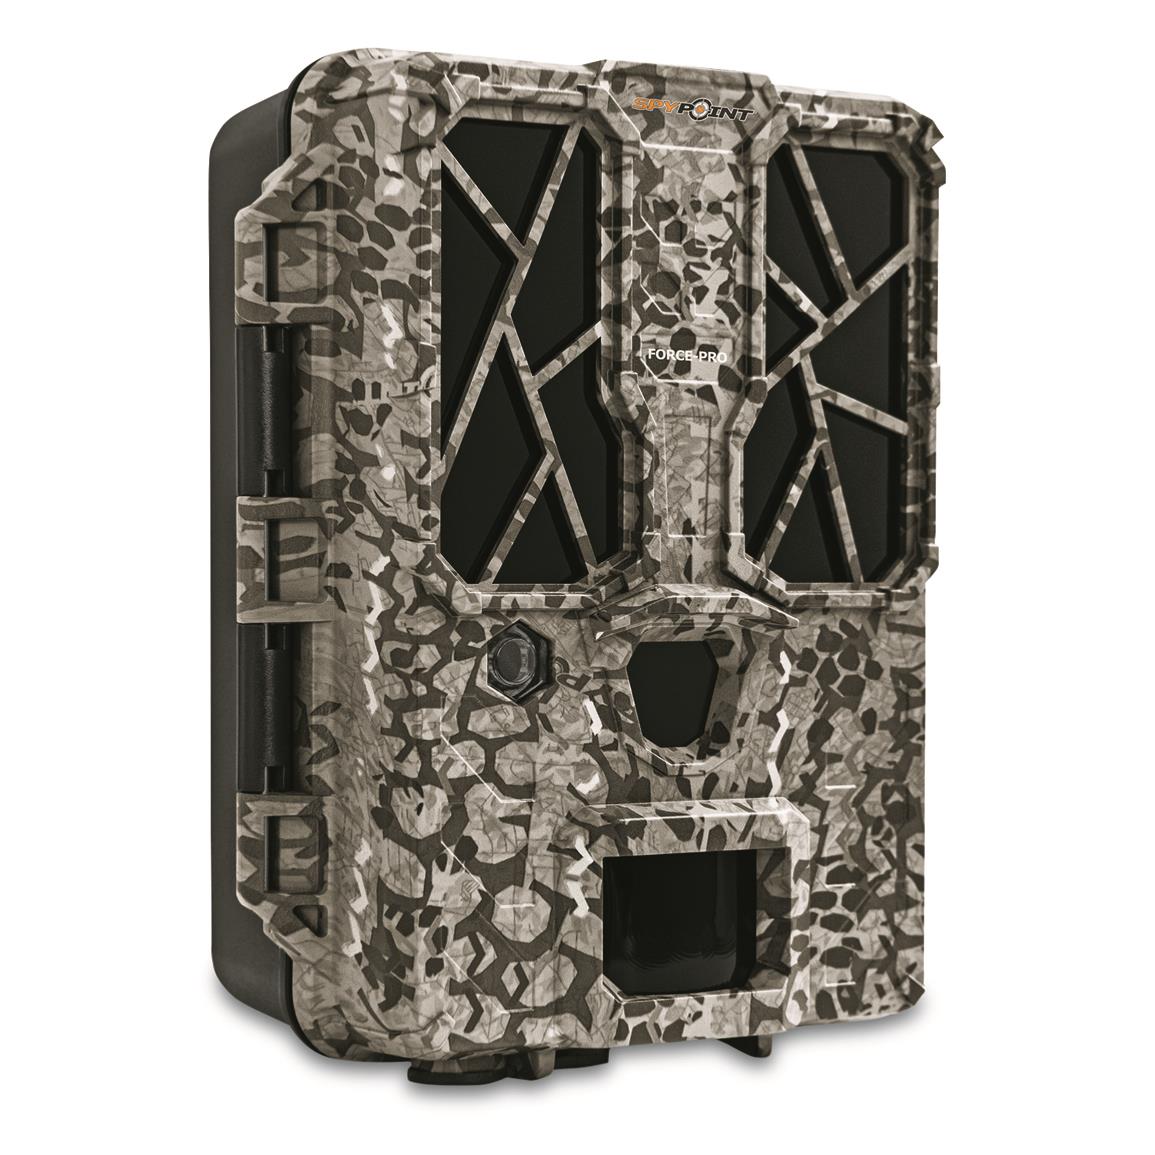 SPYPOINT Force-Pro Trail/Game Camera, 30MP